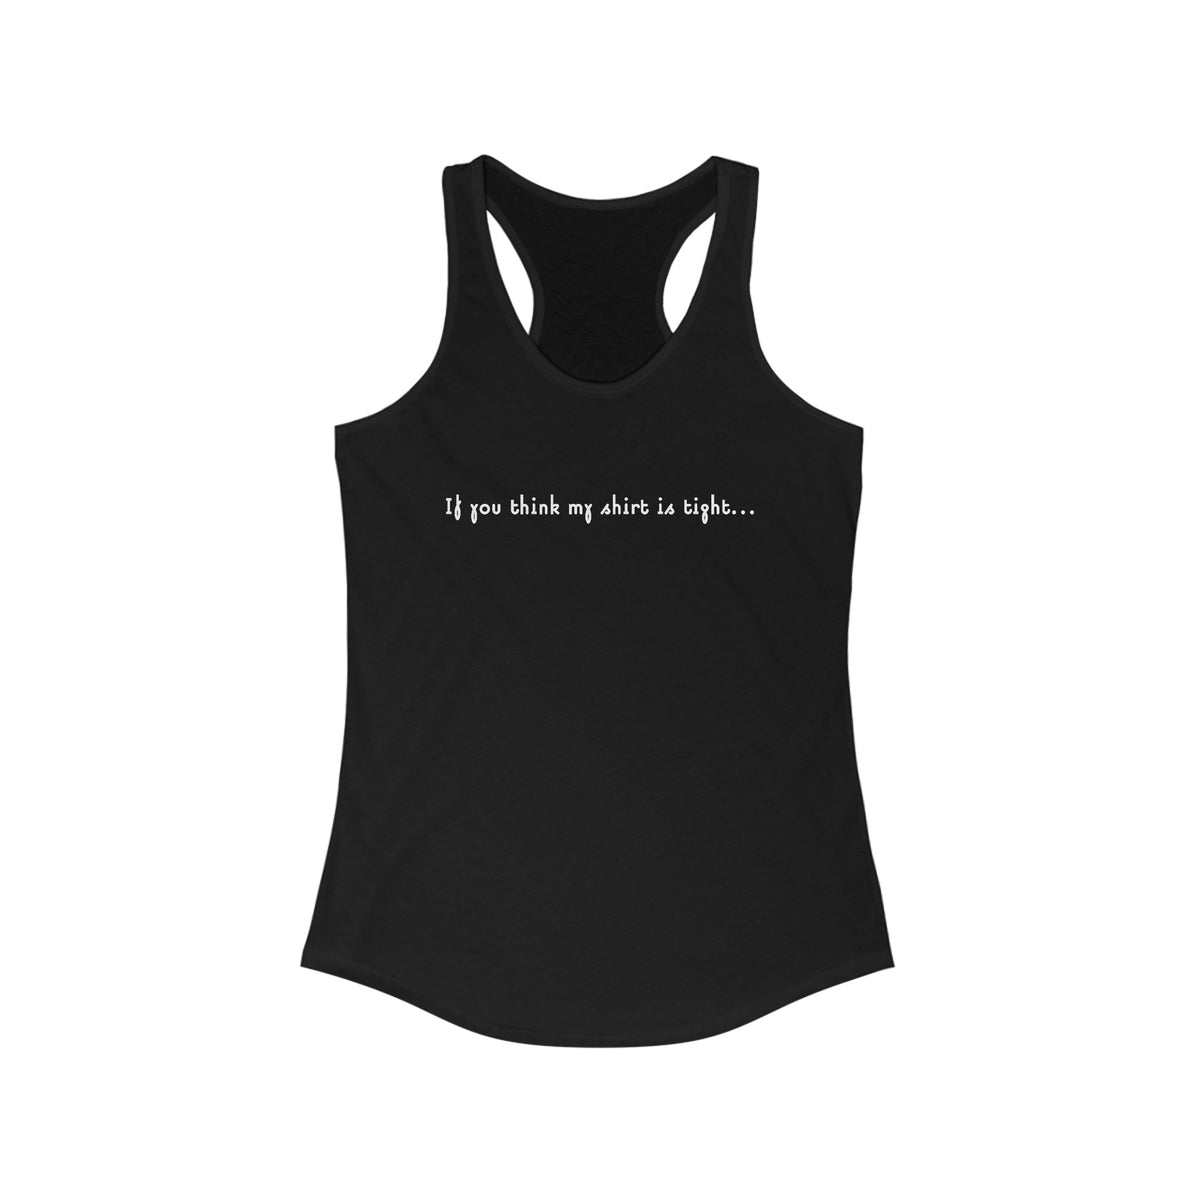 If You Think My Shirt Is Tight... - Women’s Racerback Tank